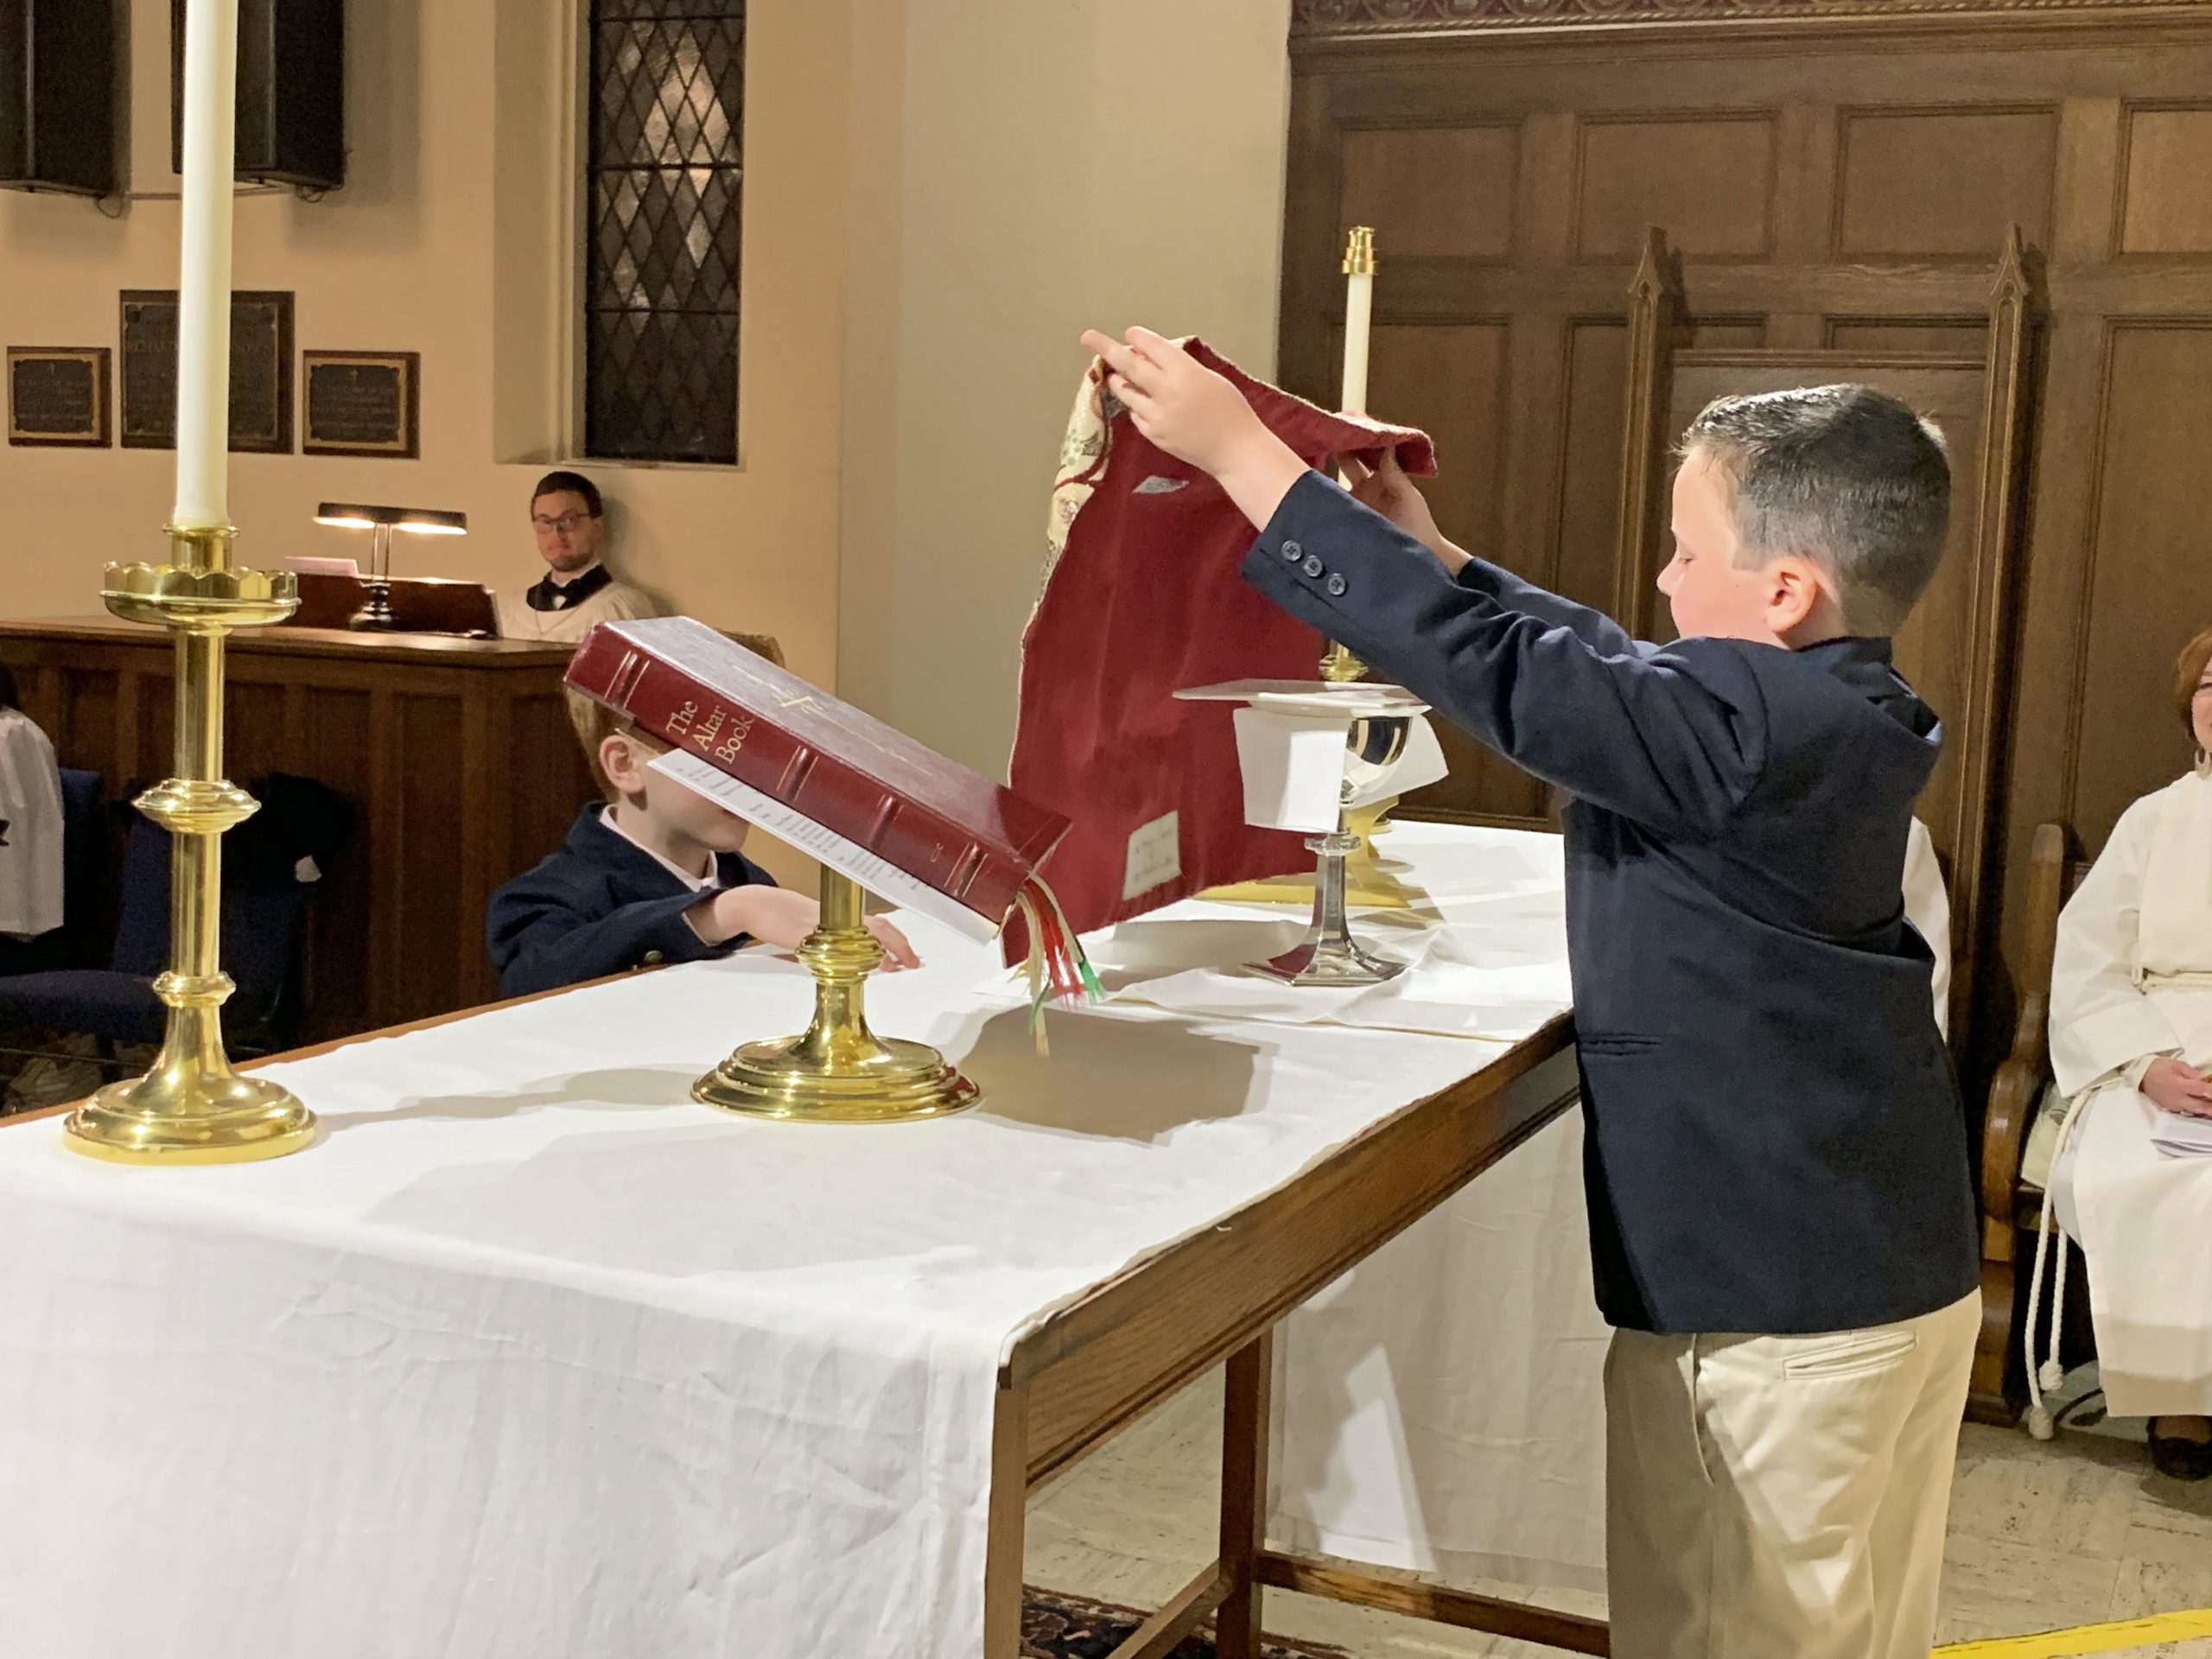 young boy preparing the alter for communion